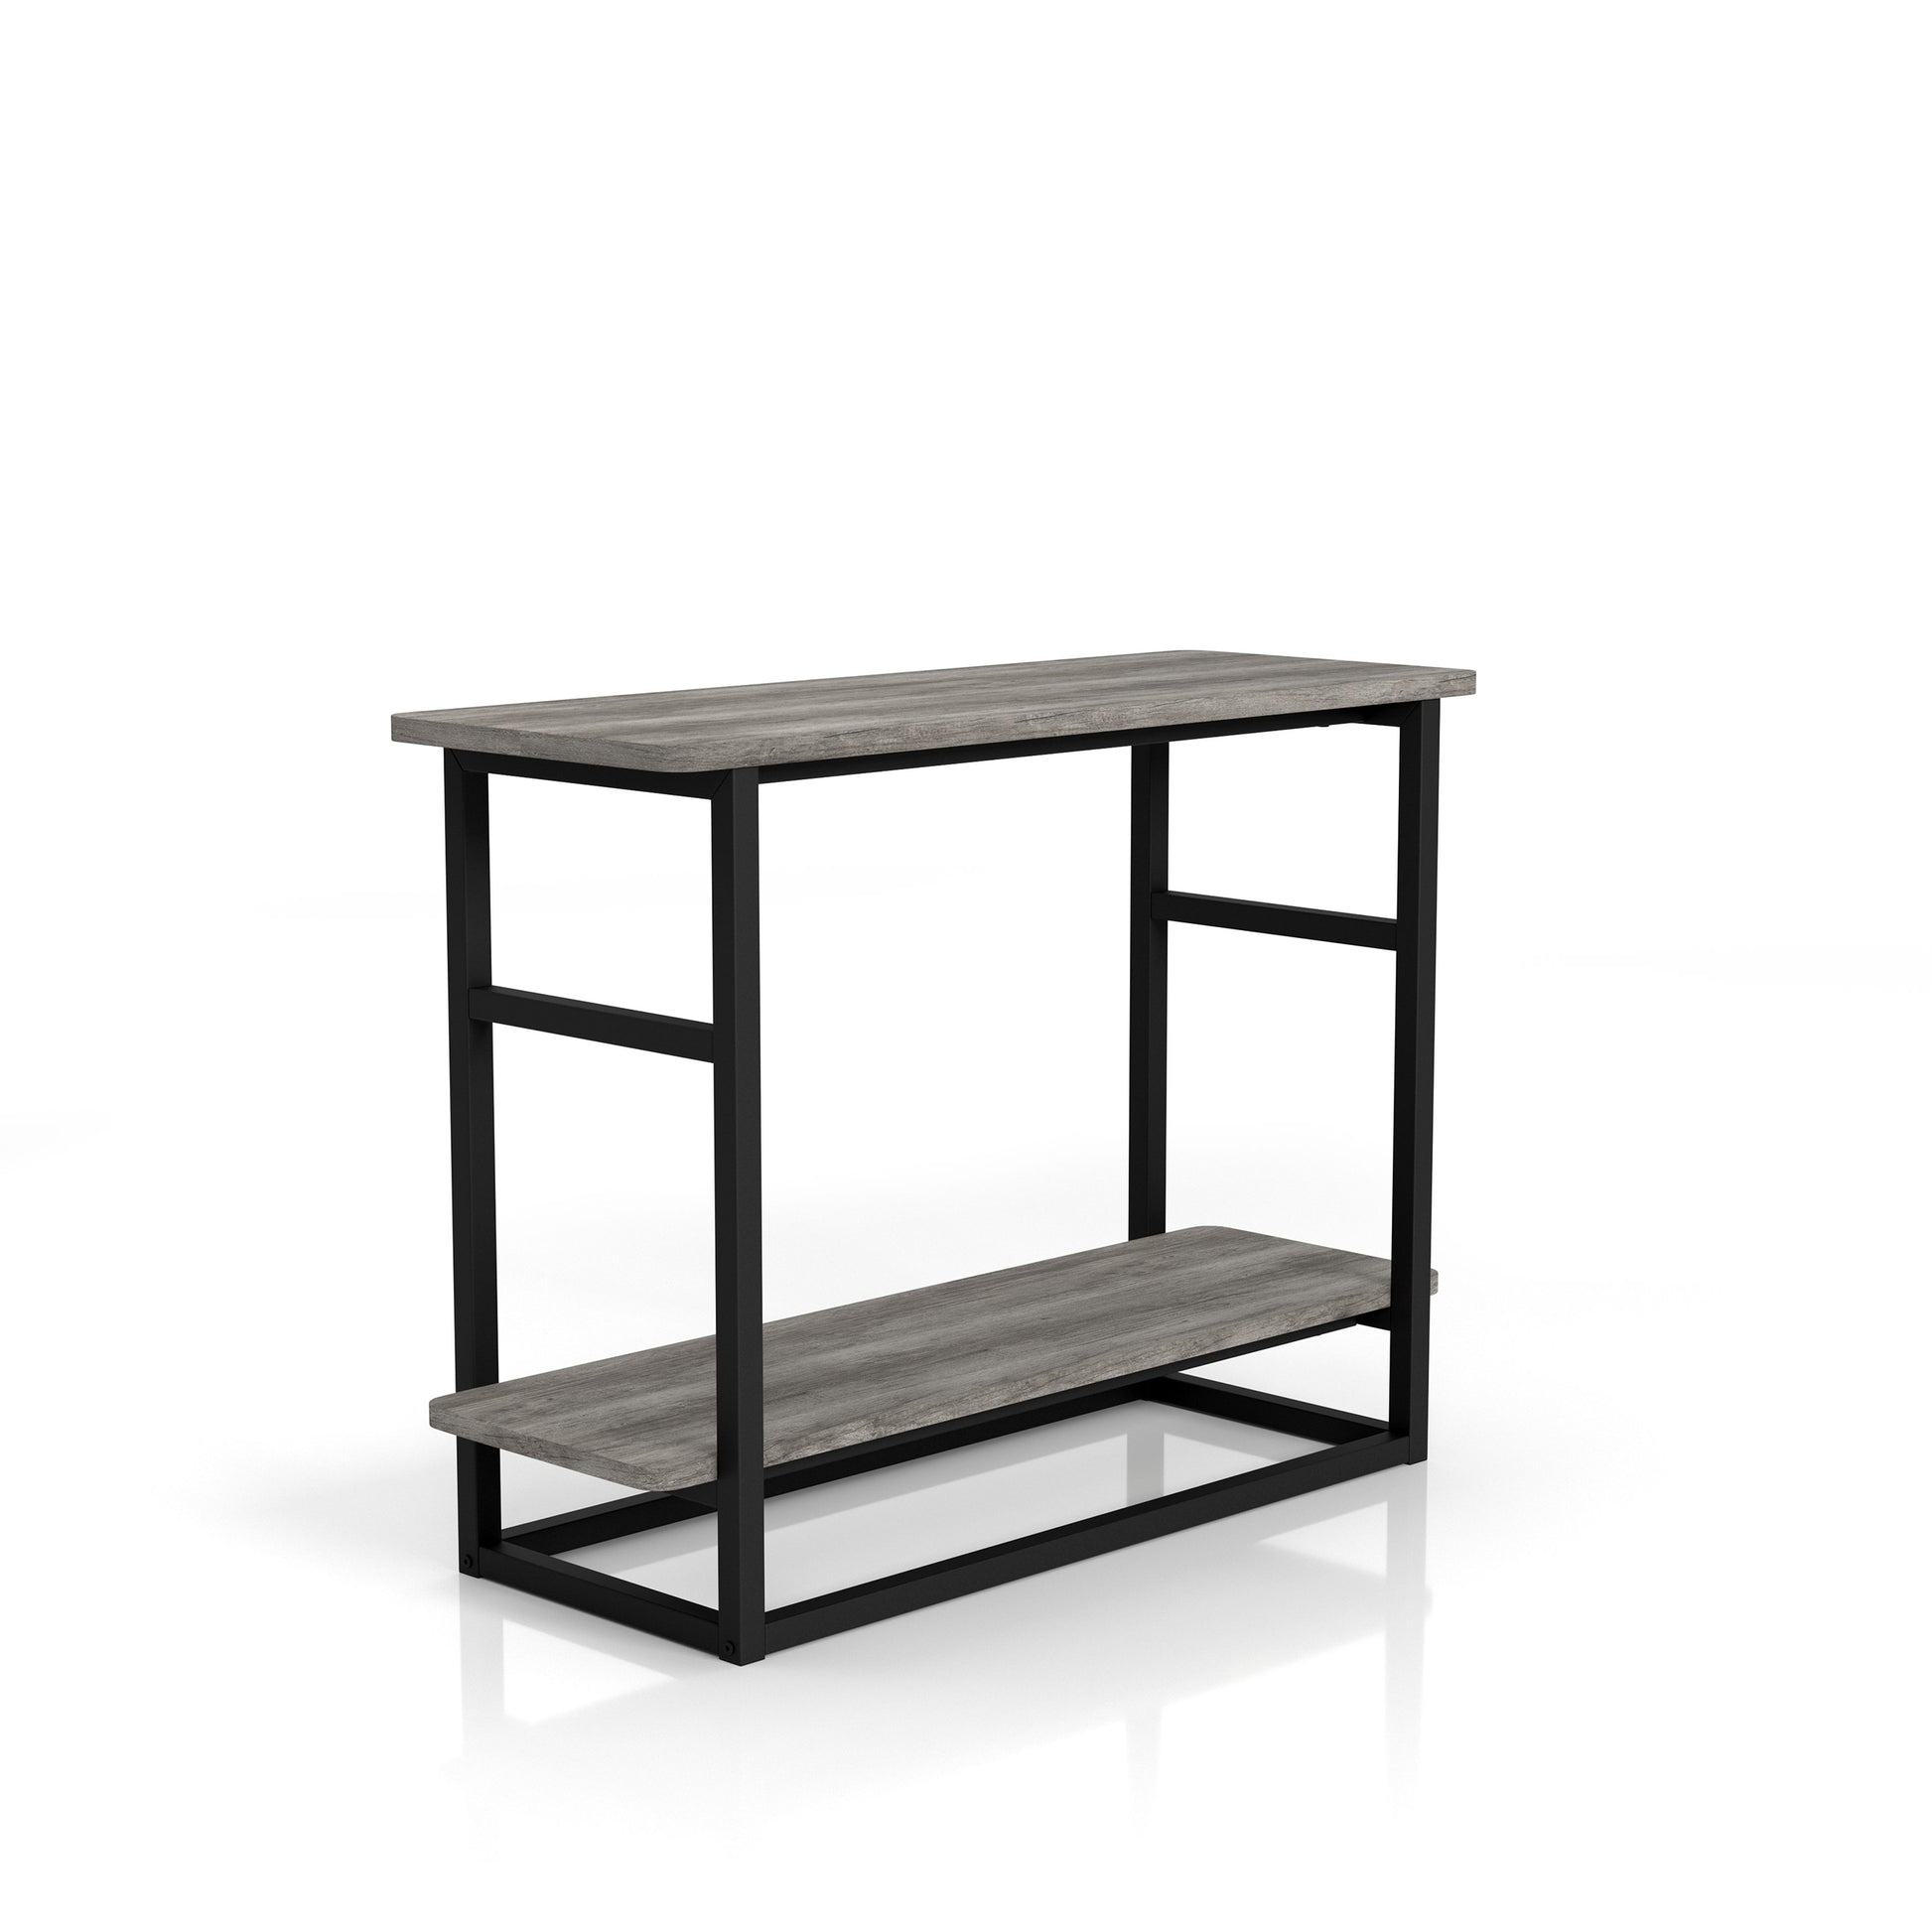 Left angled industrial vintage gray oak one-shelf long side table in a living room with accessories